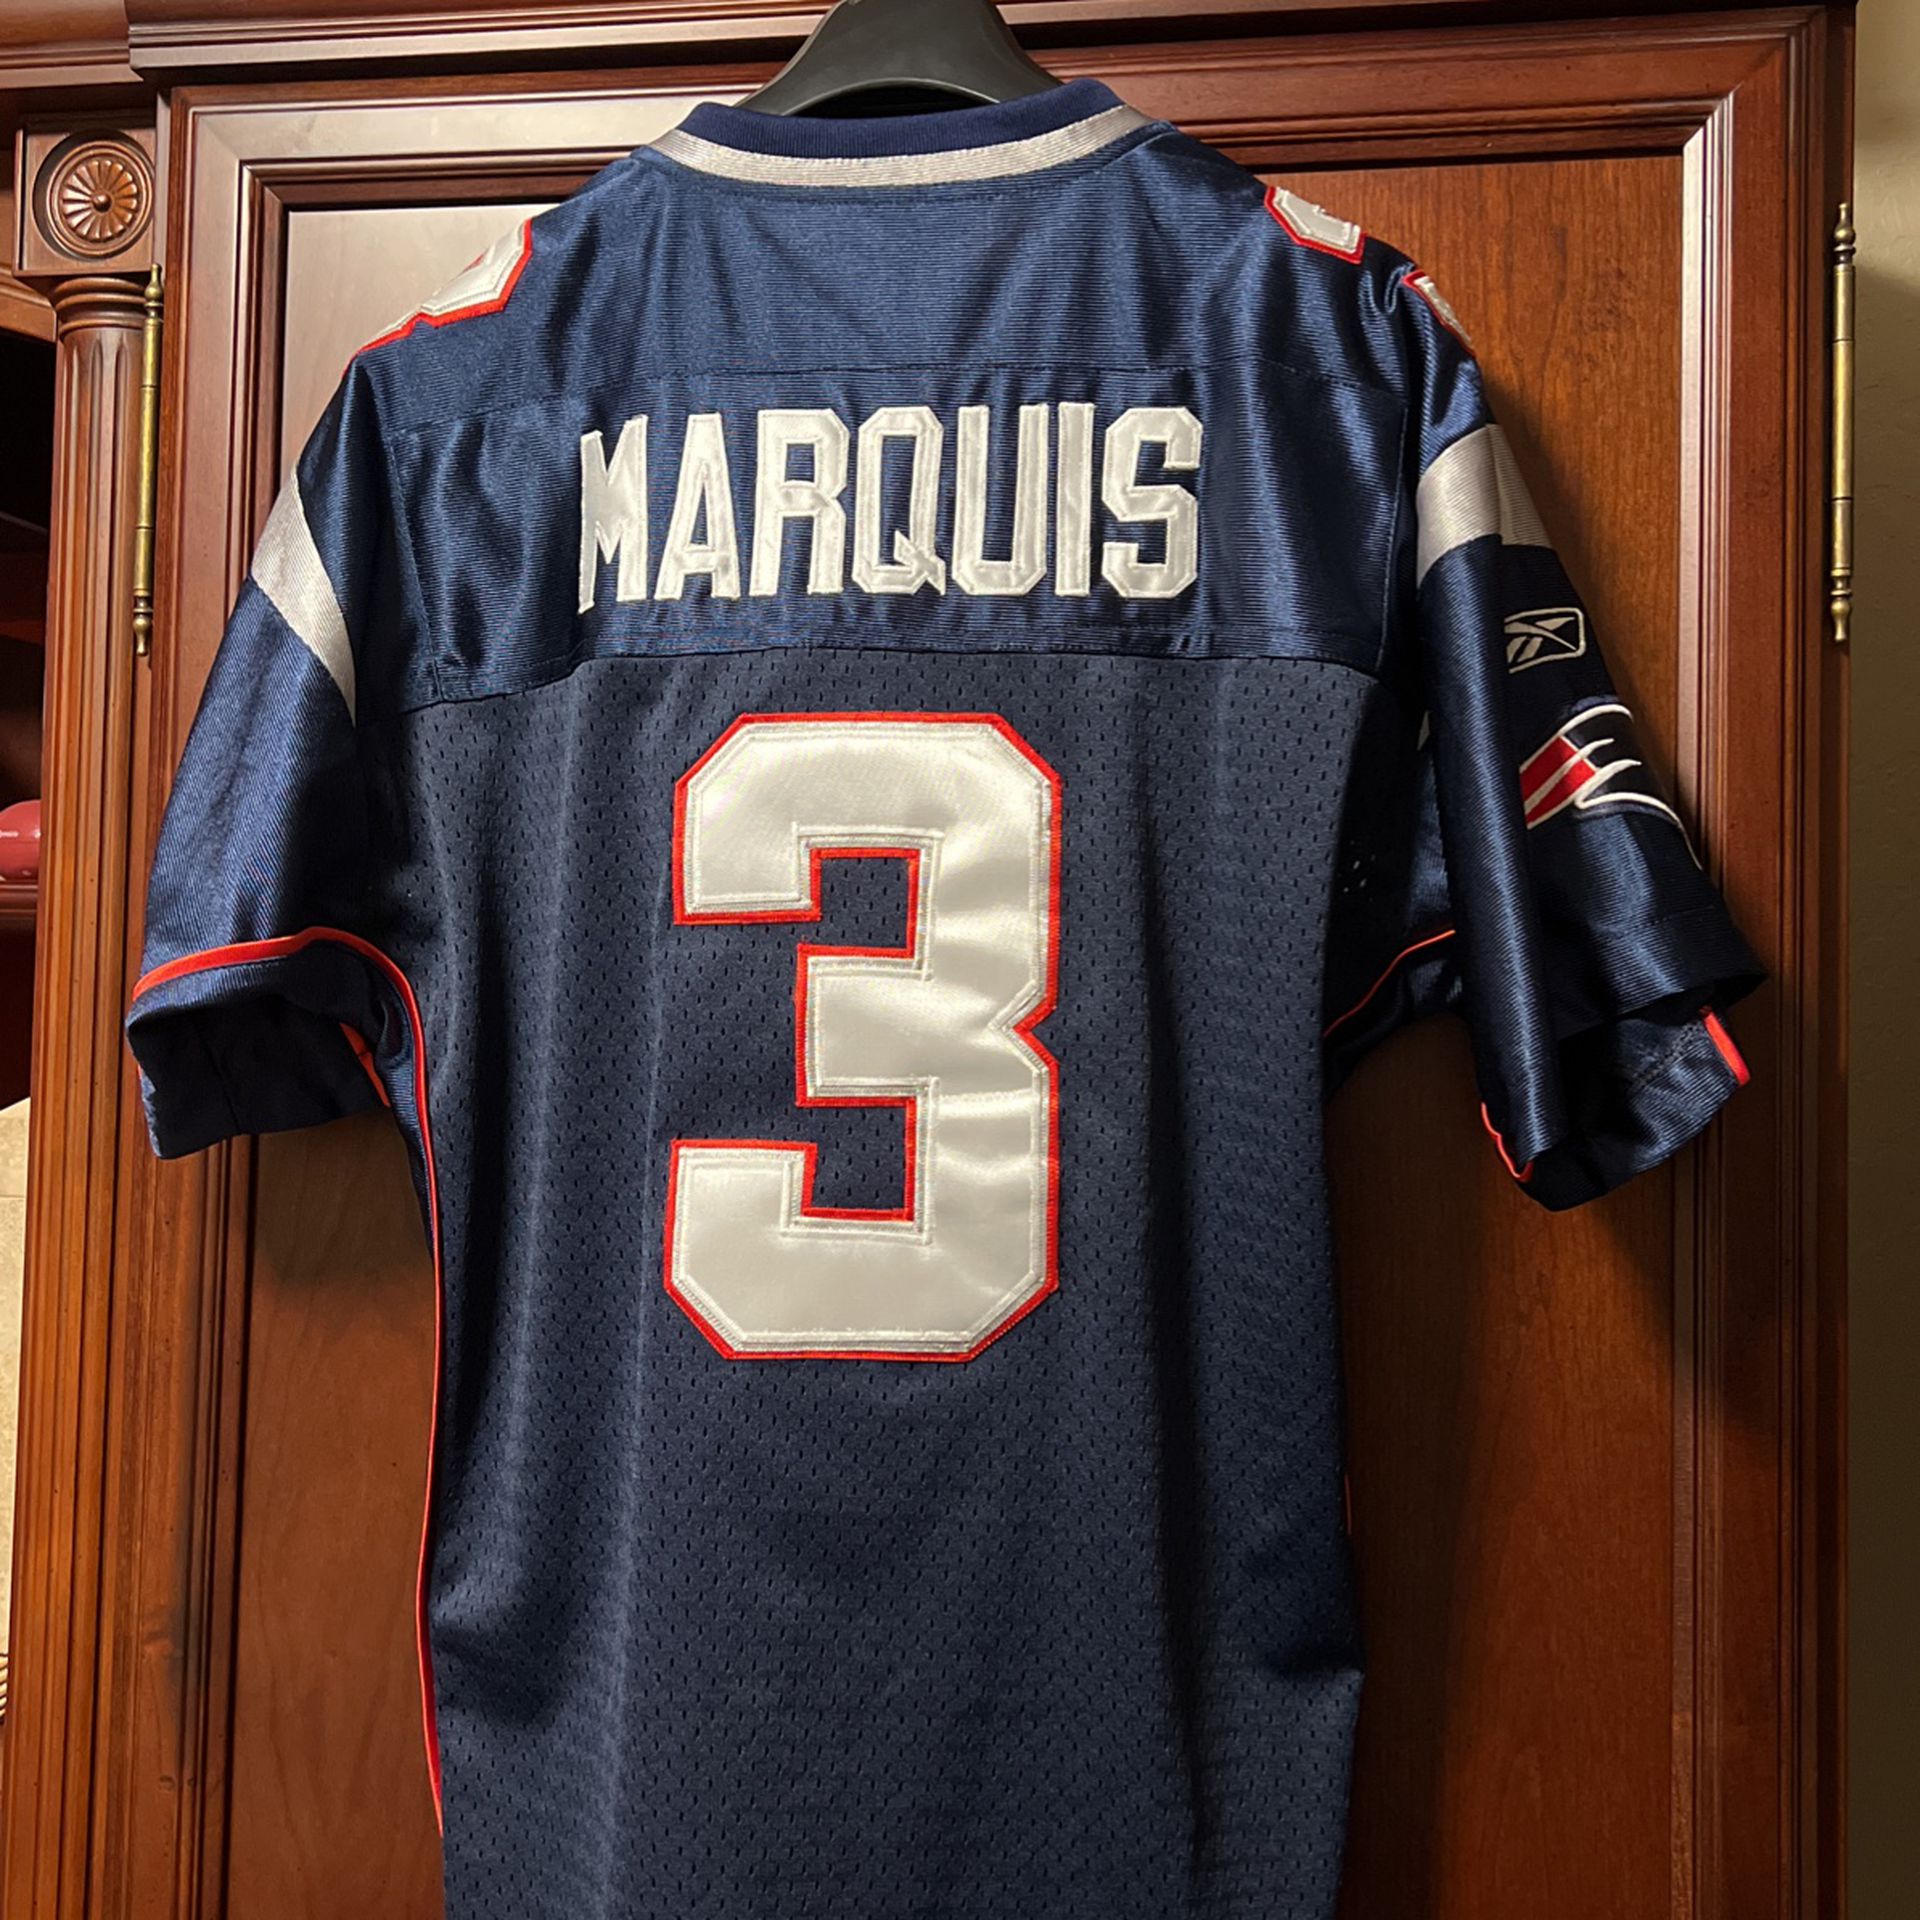 NFL New England Patriots Marquis #3 Blue Jersey!